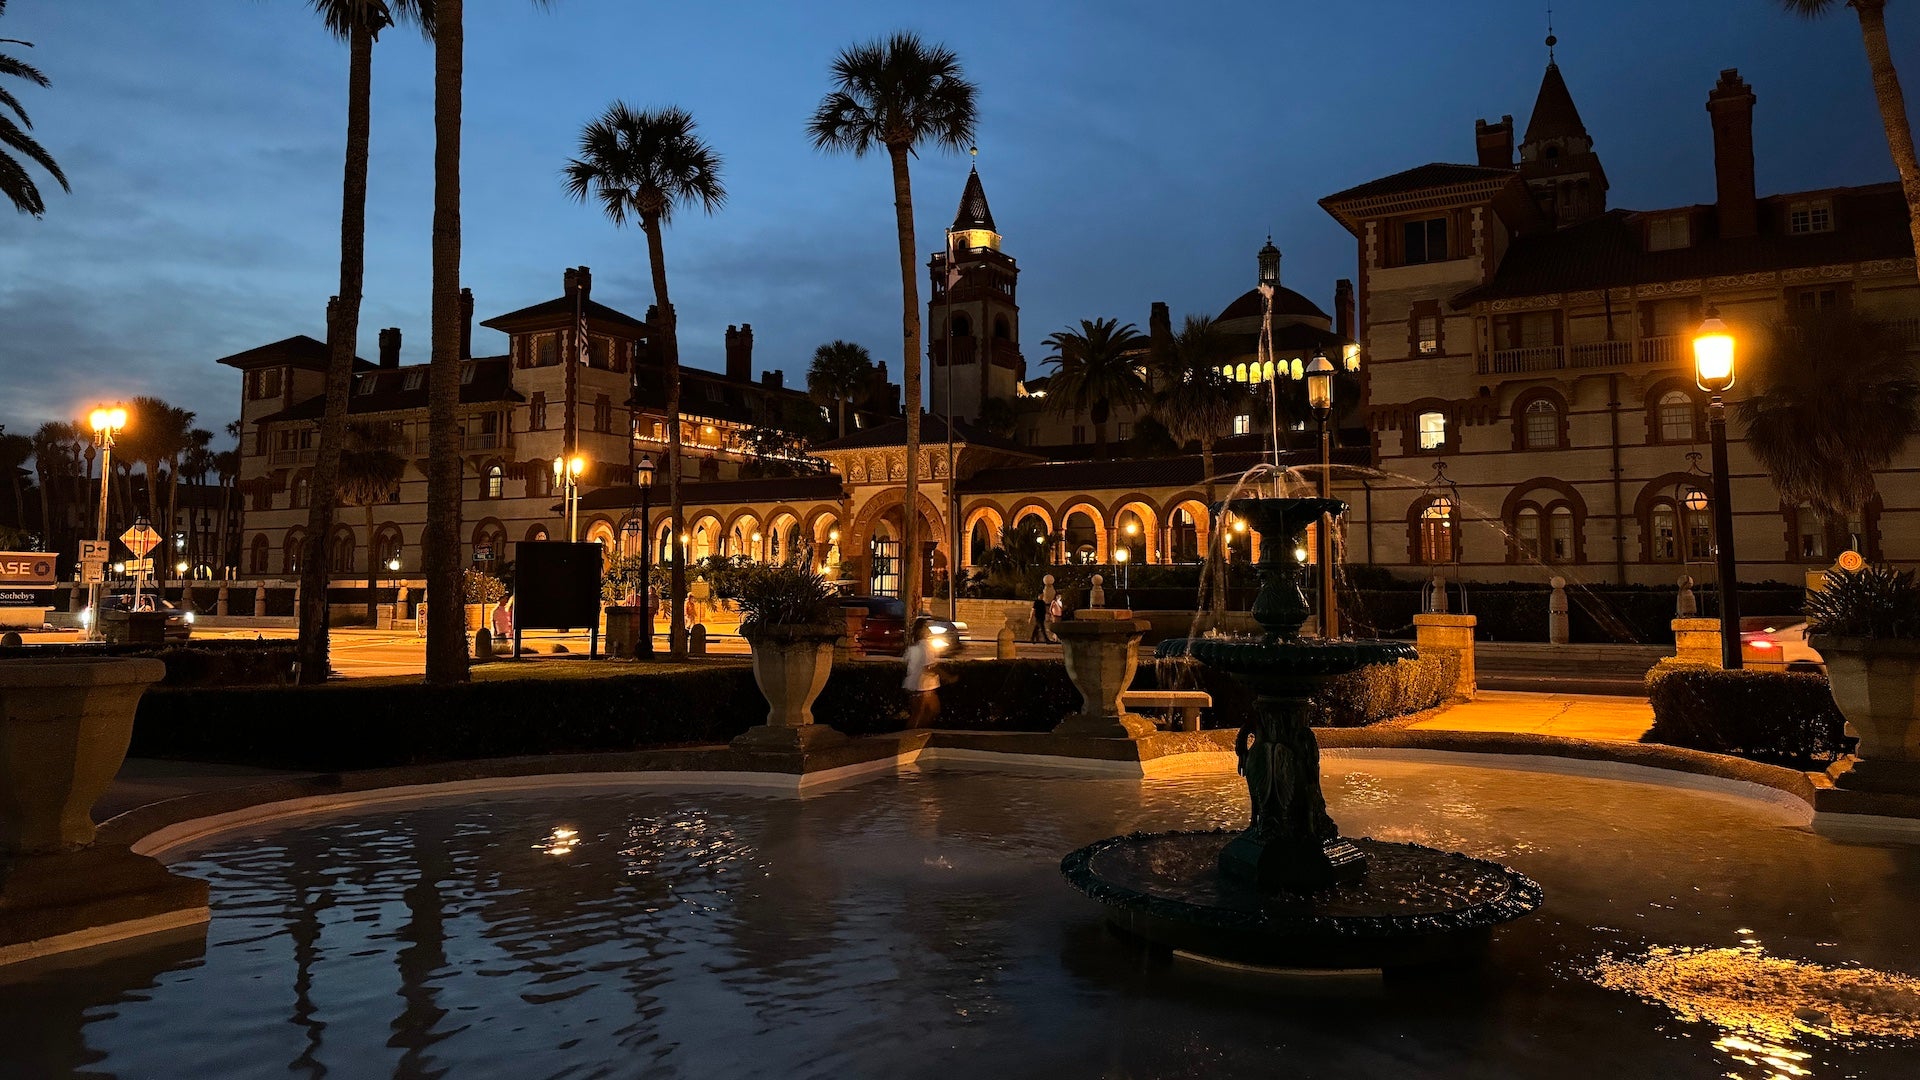 Fountain at night with Flagler college in the background